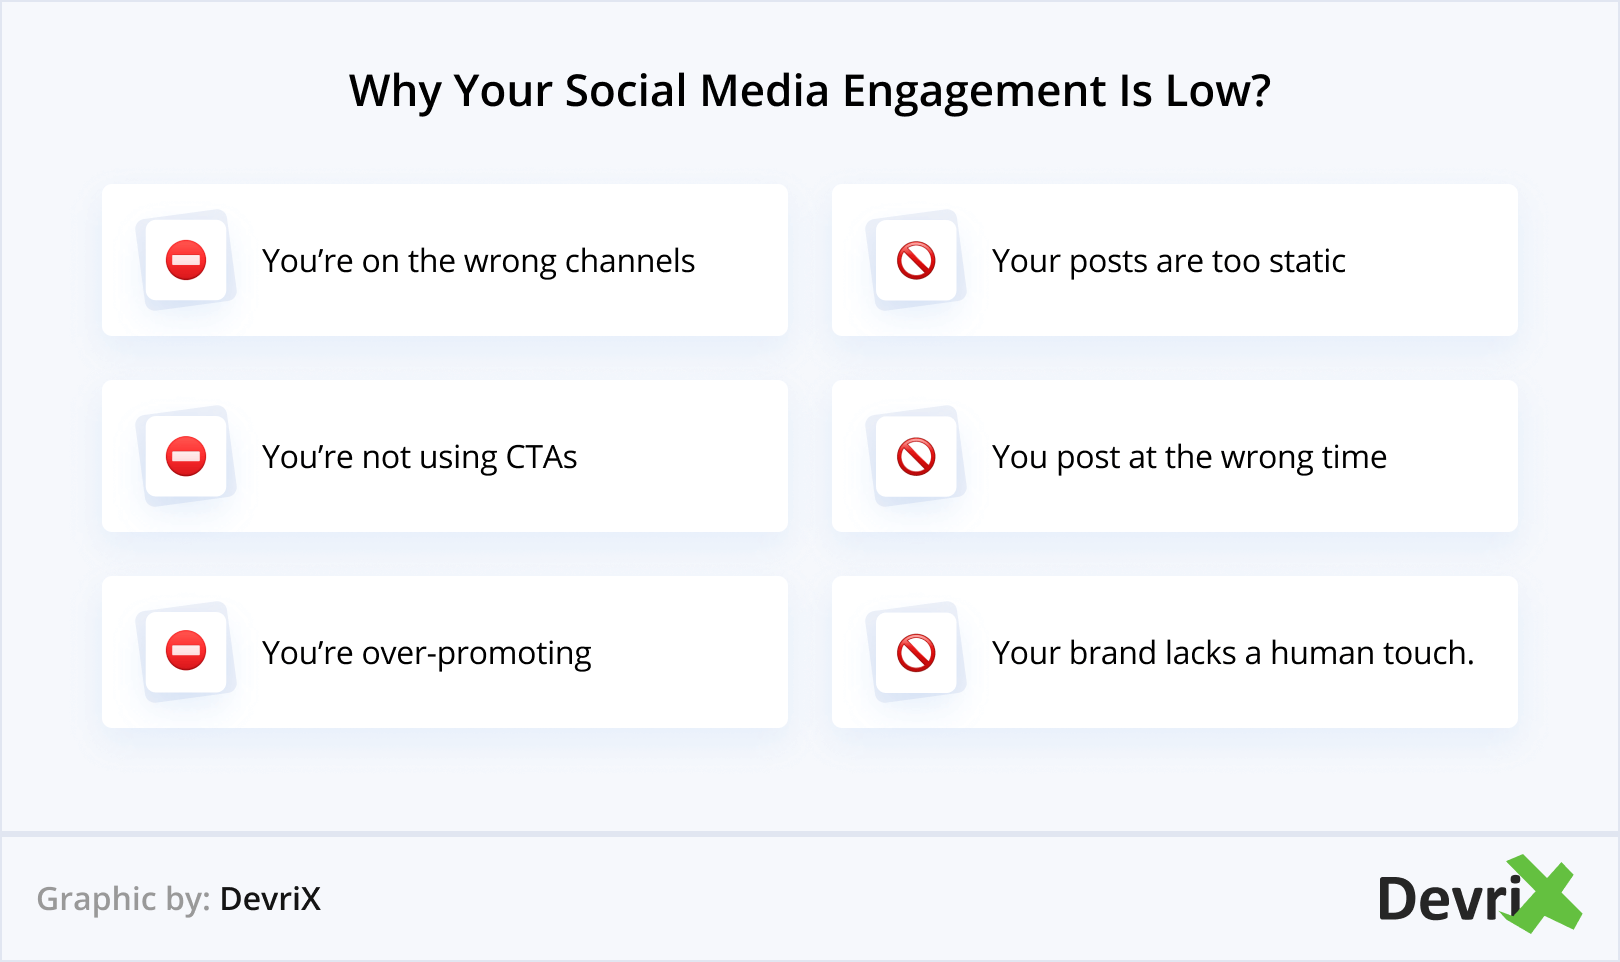 Why Your Social Media Engagement Is Low